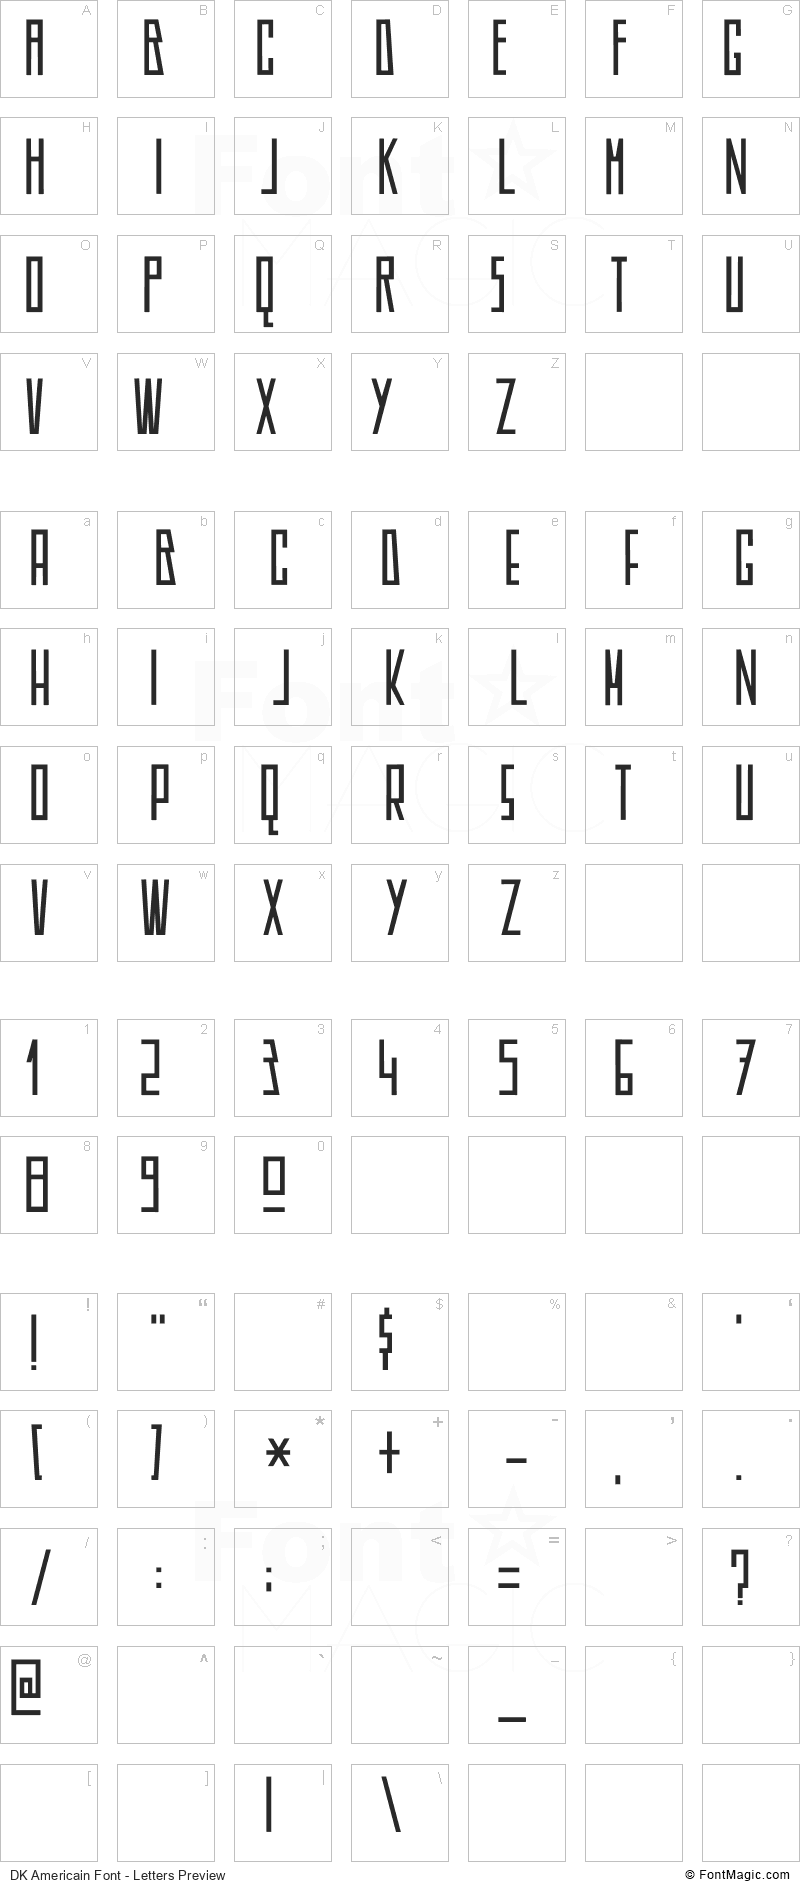 DK Americain Font - All Latters Preview Chart